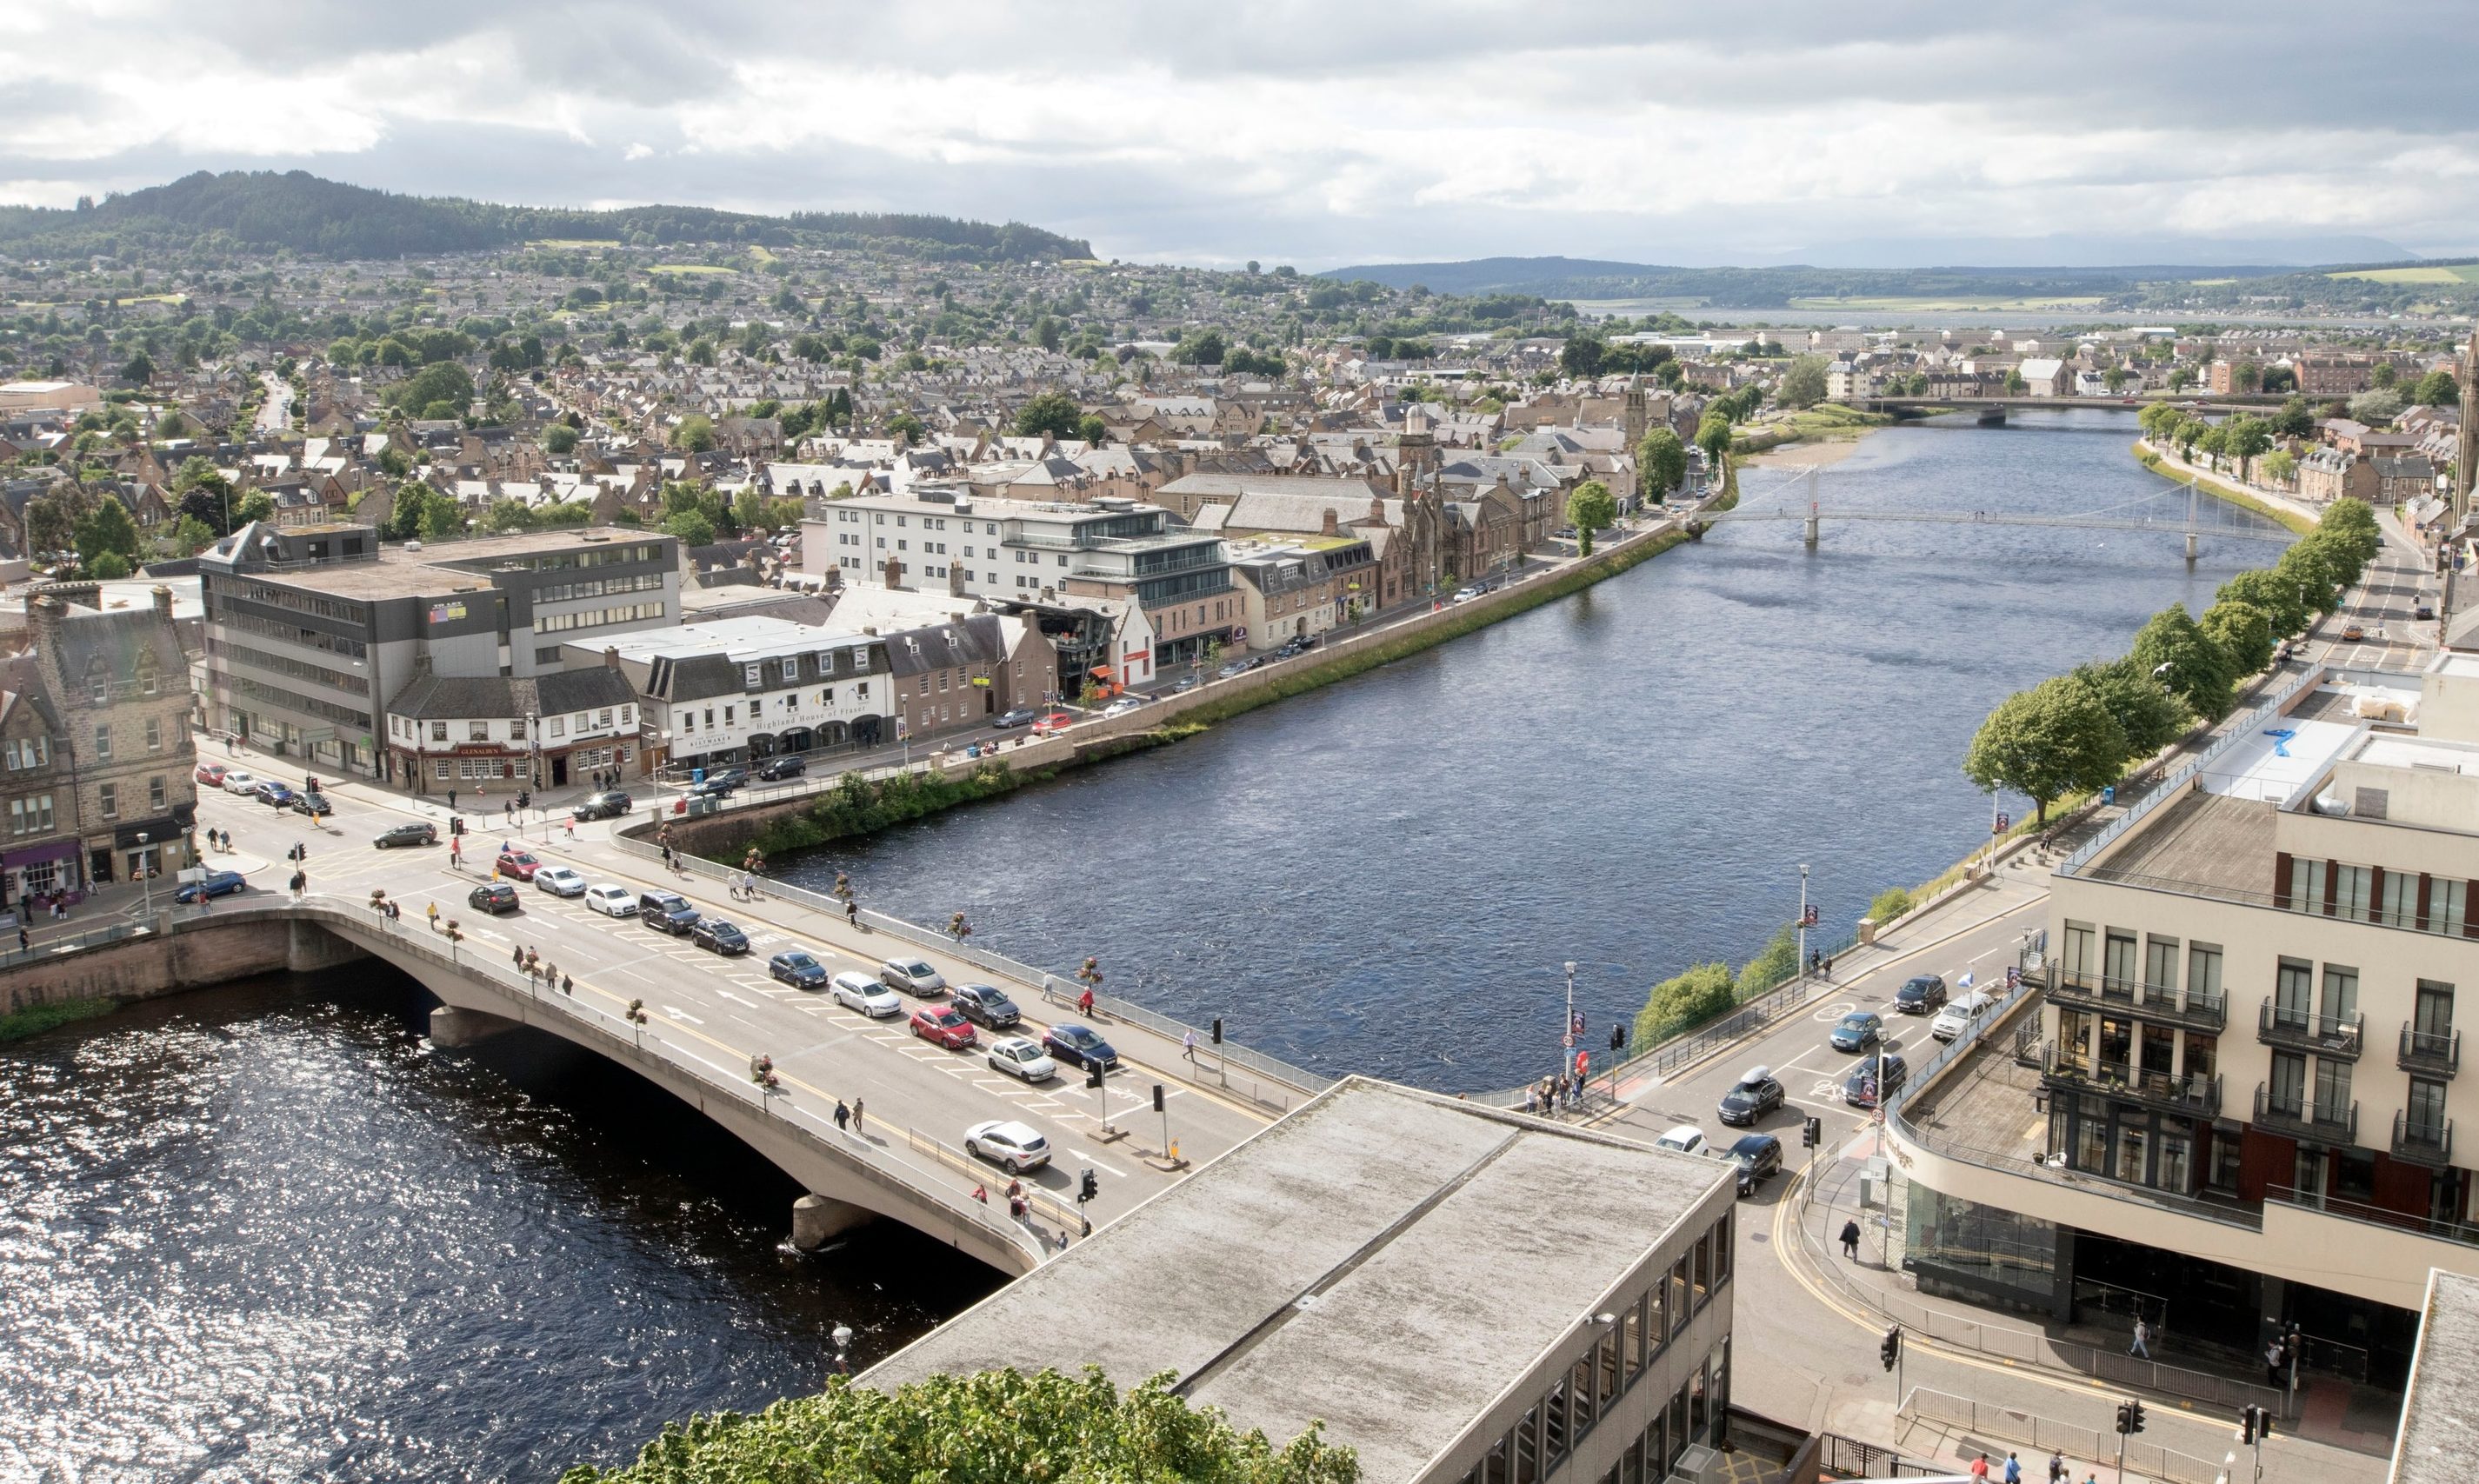 View of the River Ness, Ness Bridge, and western Inverness from the viewpoint at Inverness Castle.